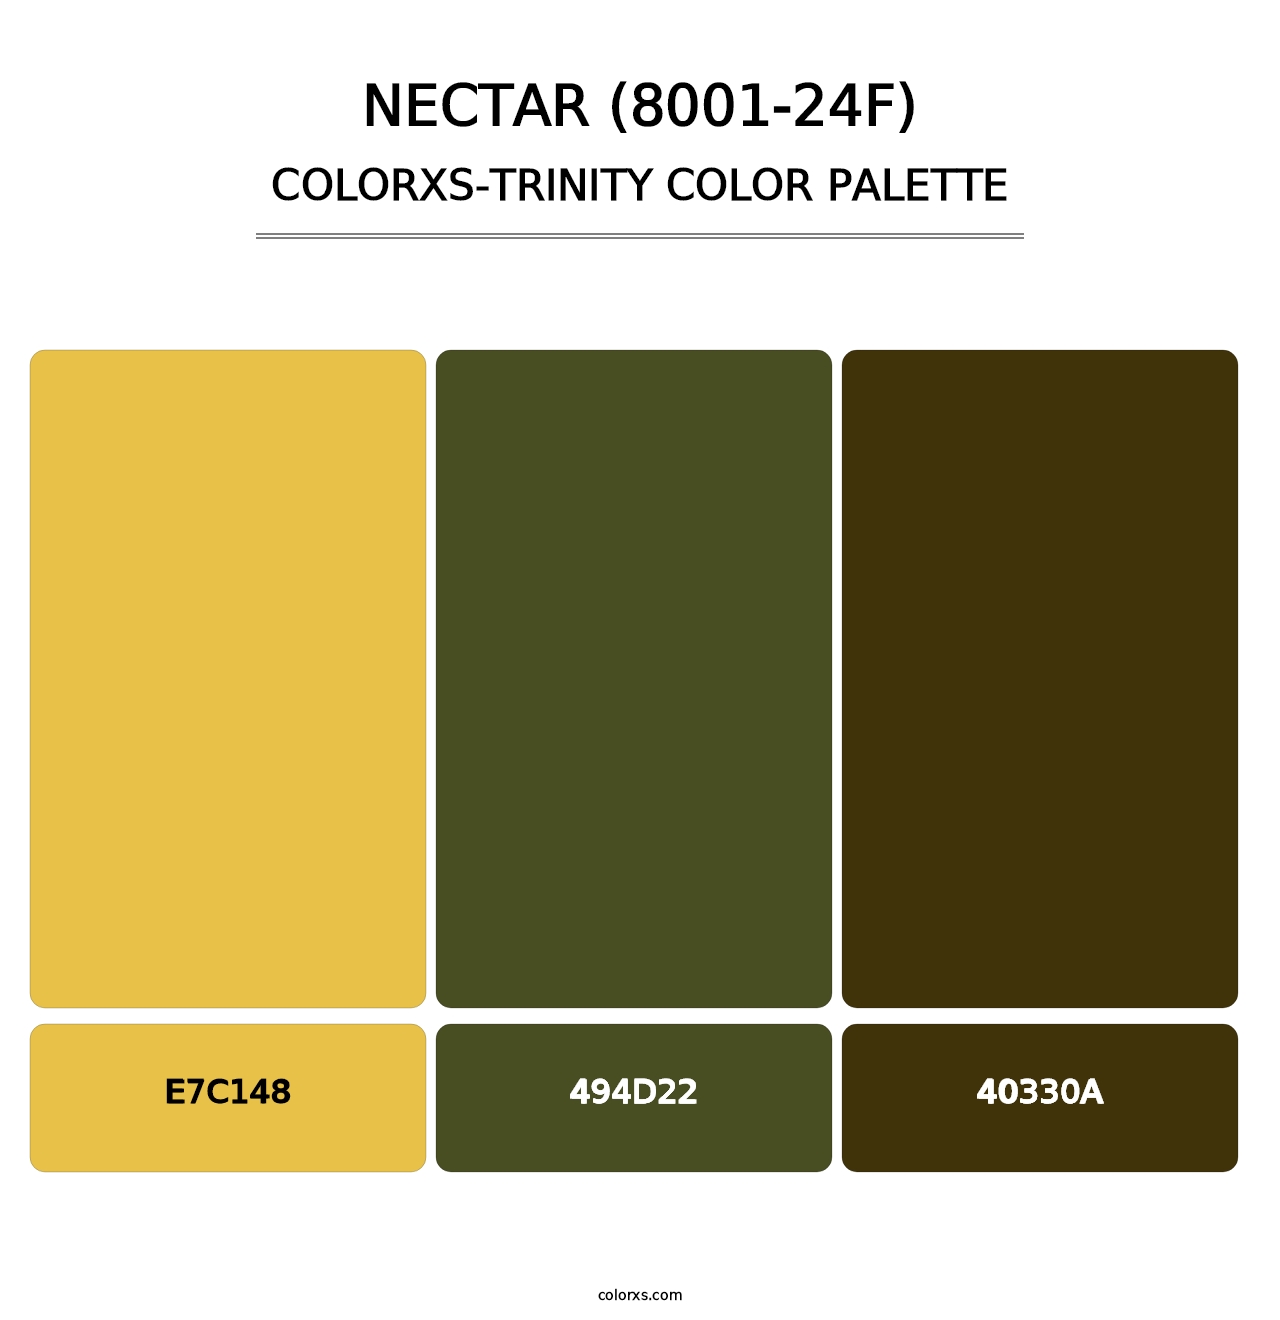 Nectar (8001-24F) - Colorxs Trinity Palette